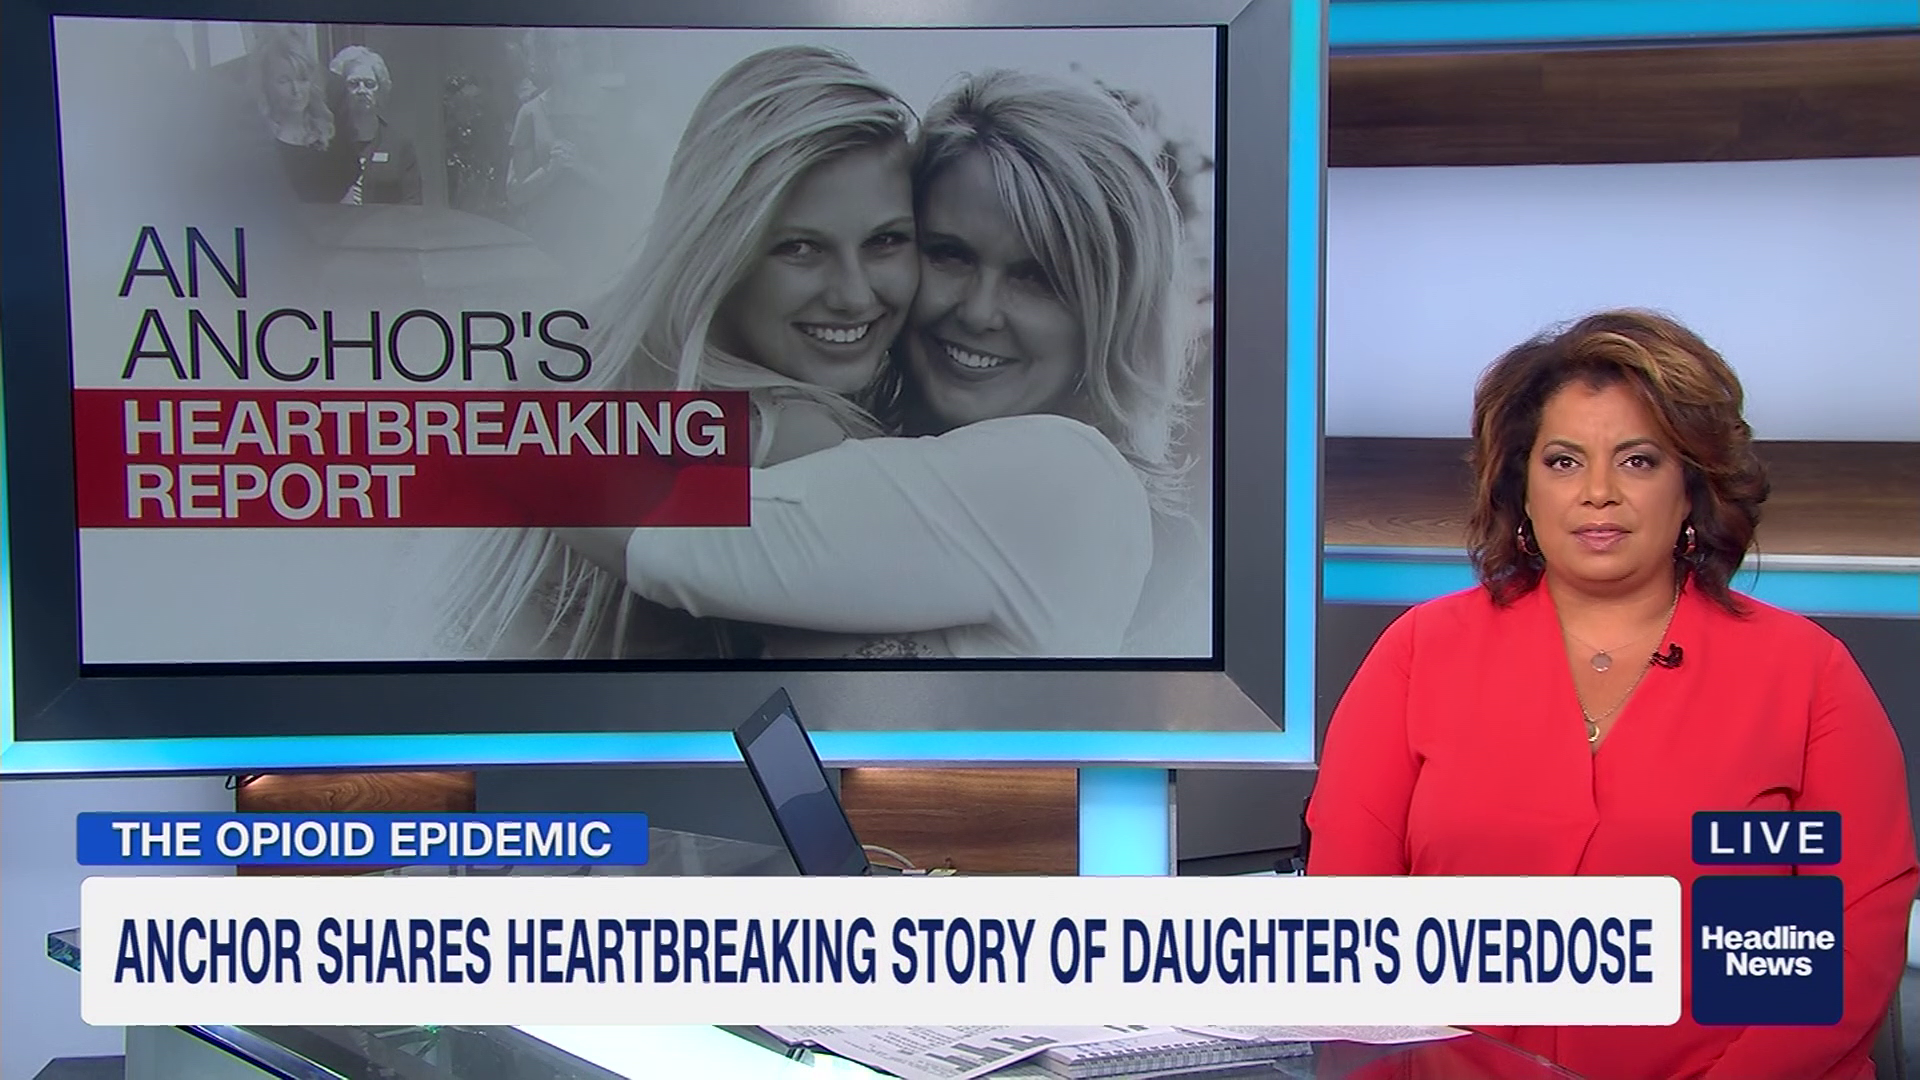 Anchor shares heartbreaking story of daughter’s overdose